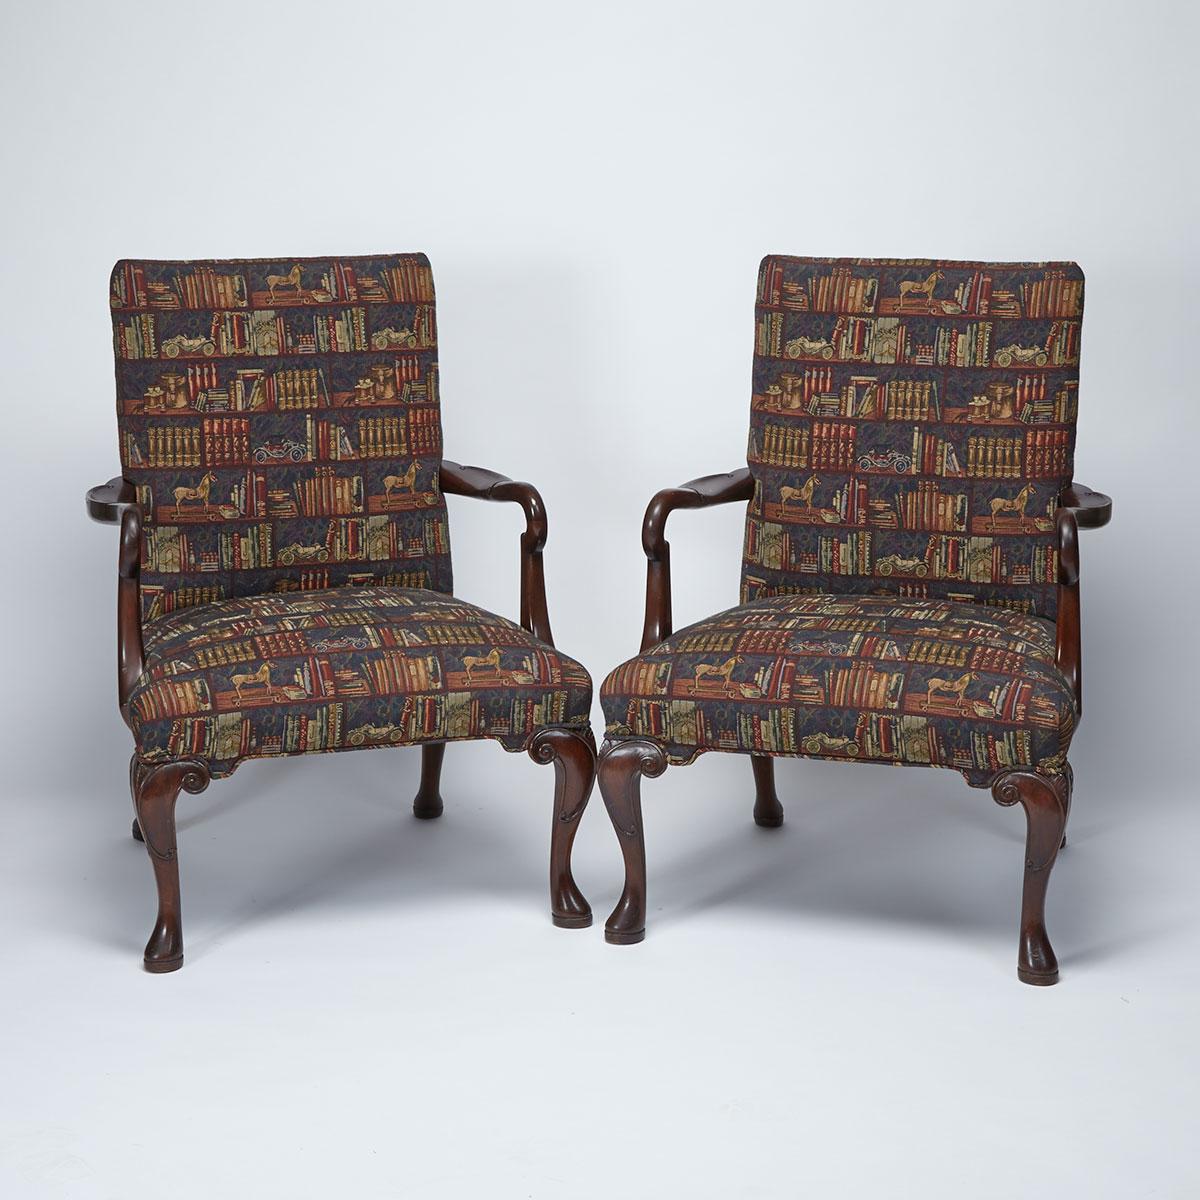 Pair of George II Style Mahogany Library Chairs, early 20th century